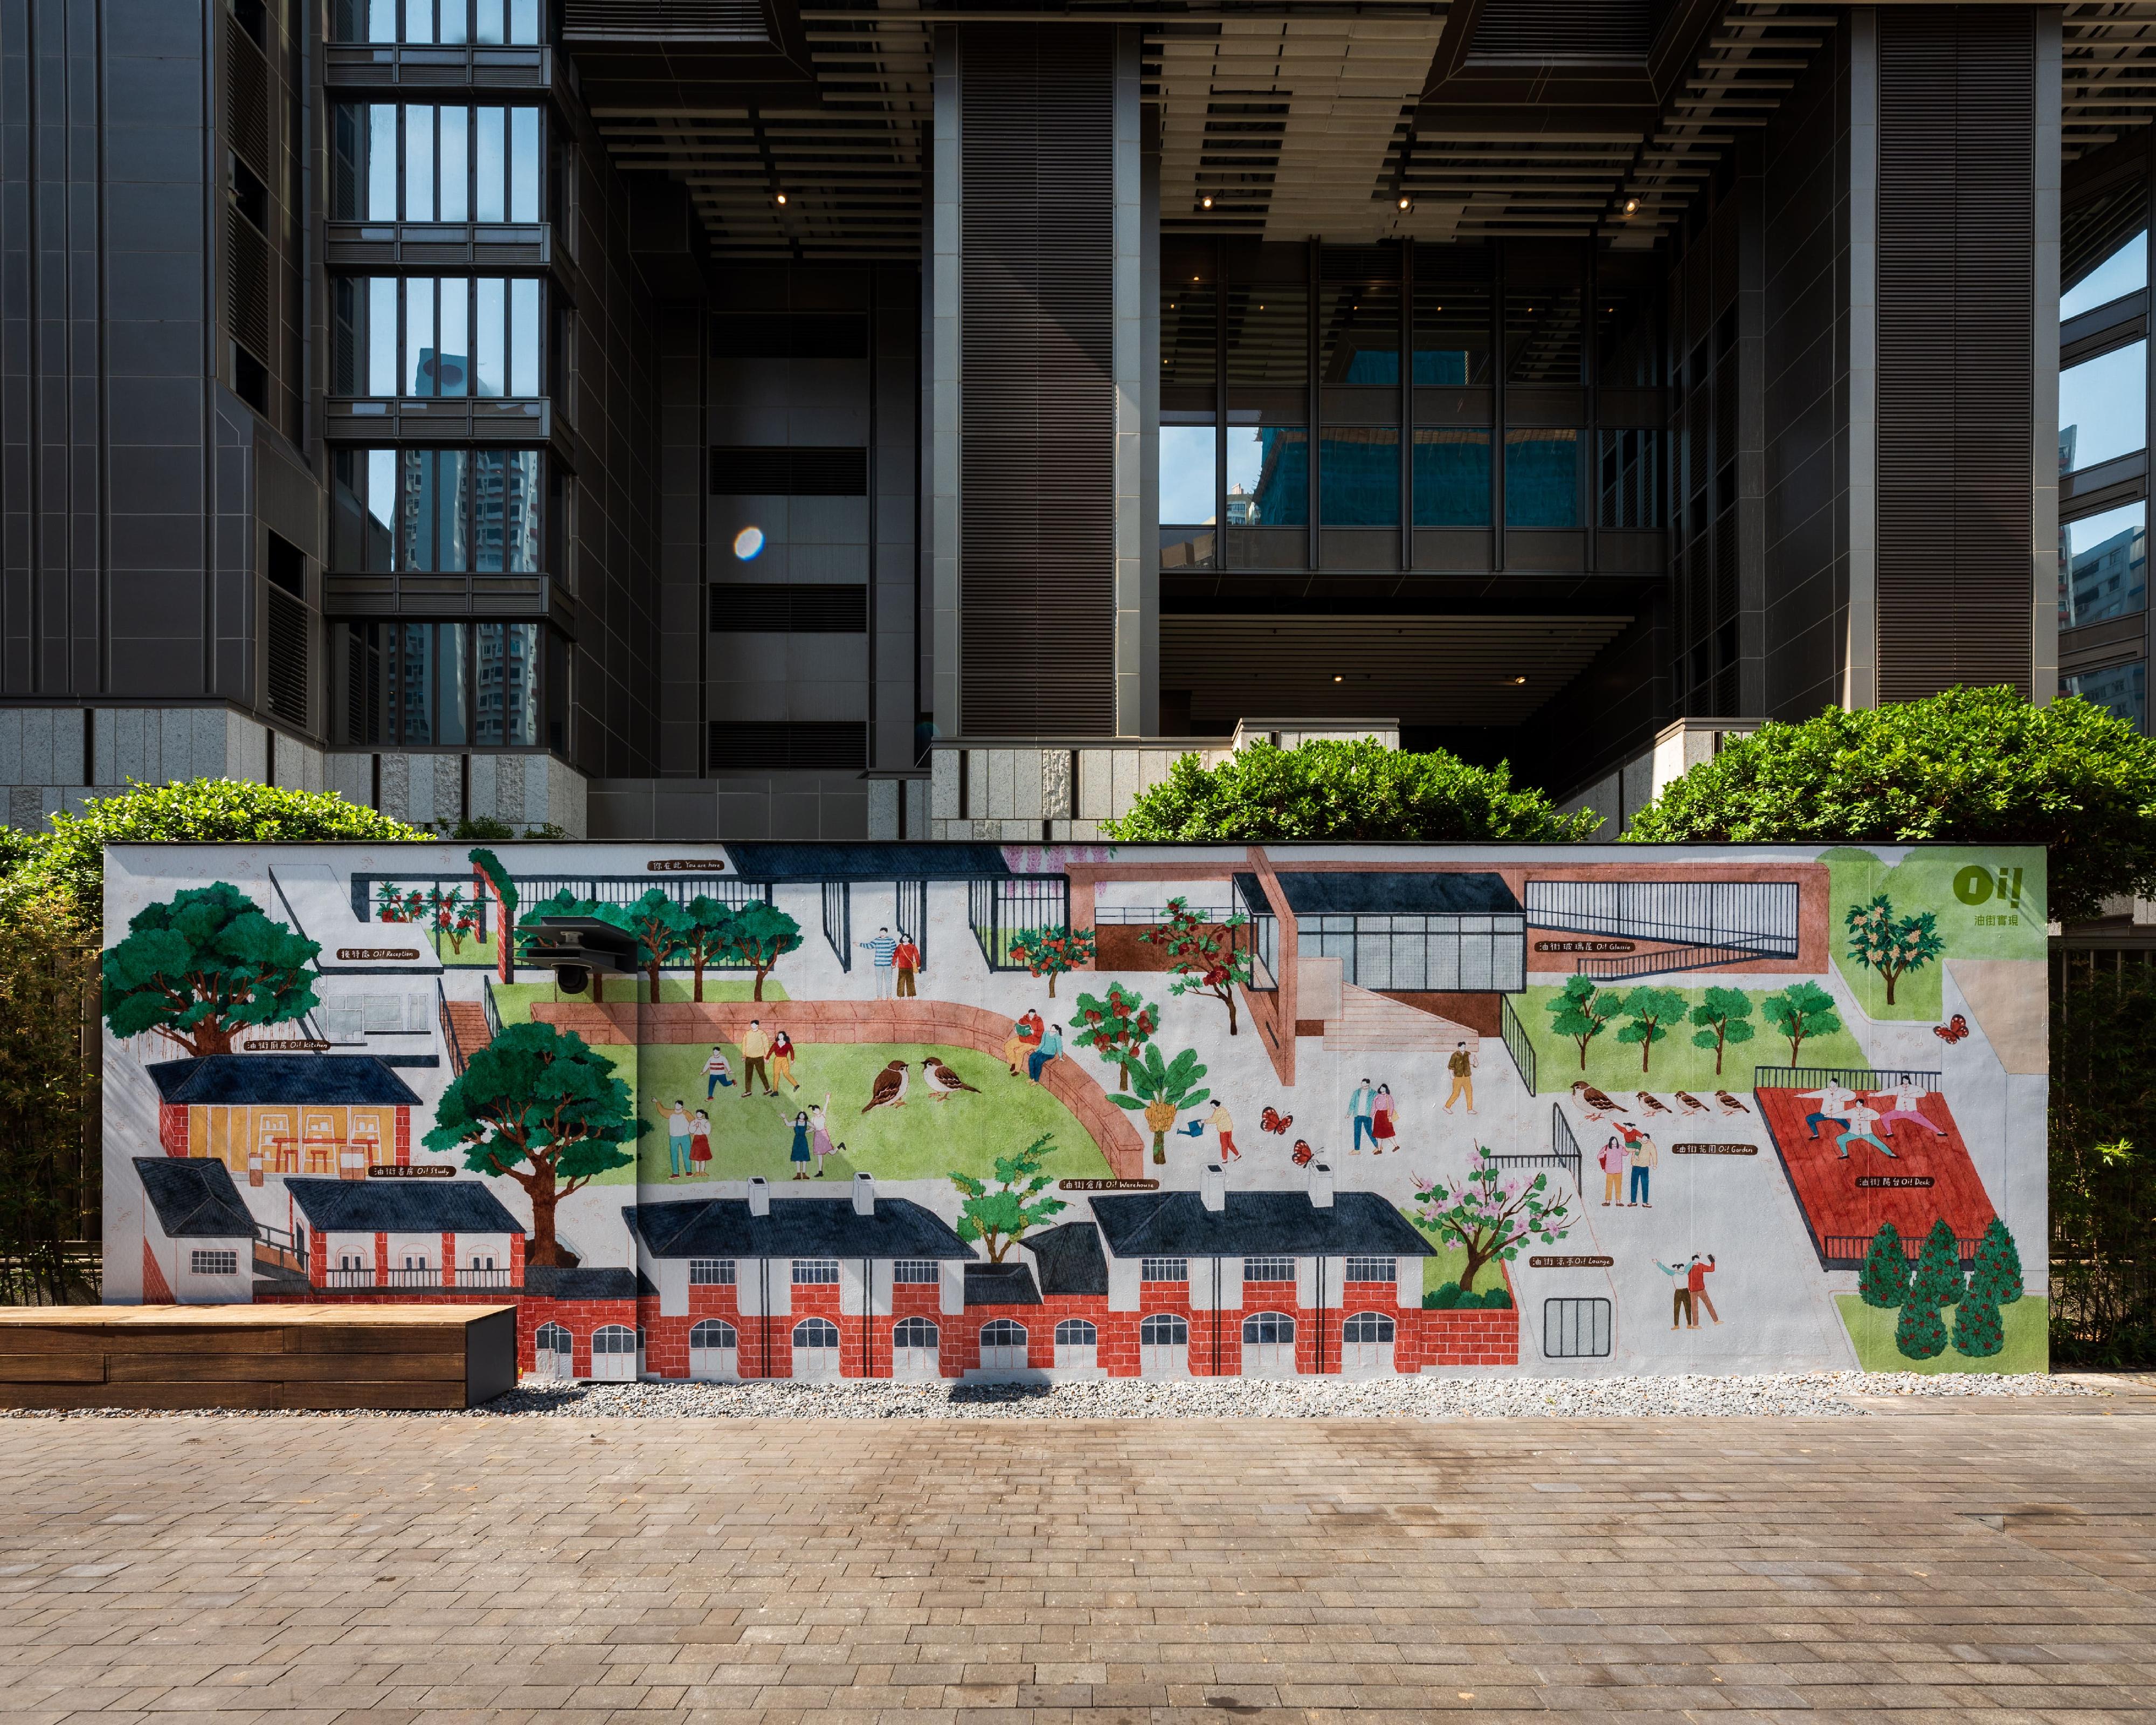 The new extension of the Oil Street Art Space (Oi!) is open to the public tomorrow (May 24). Photo shows artist Carmen Ng's outdoor mural map "Mapping Oi!", which is on display at Oi!'s outdoor area.